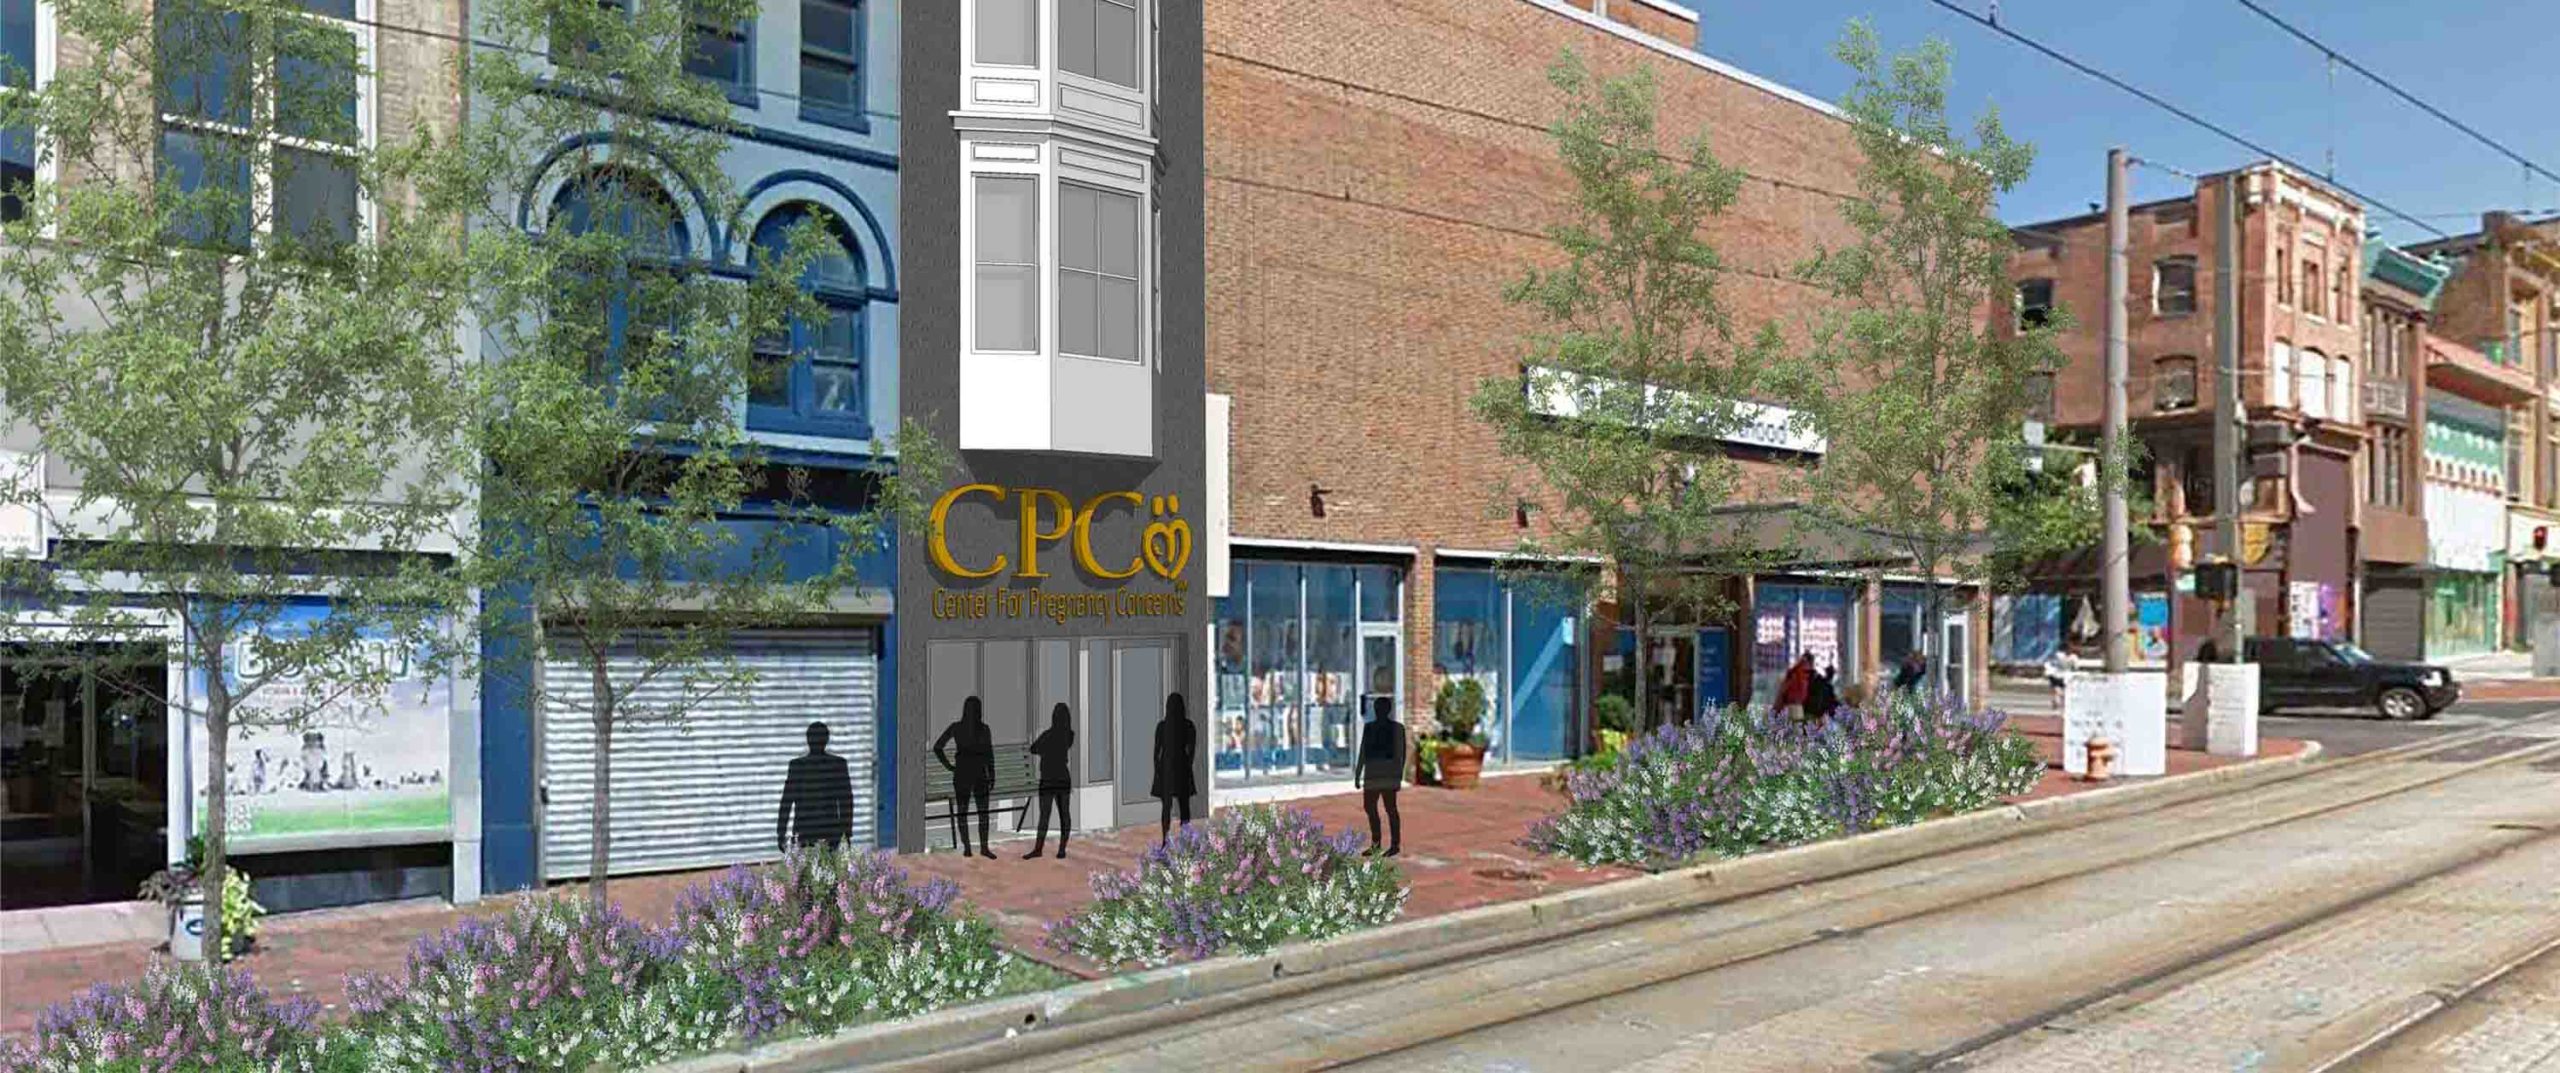 Planned pro-life pregnancy center in downtown Baltimore gets boost